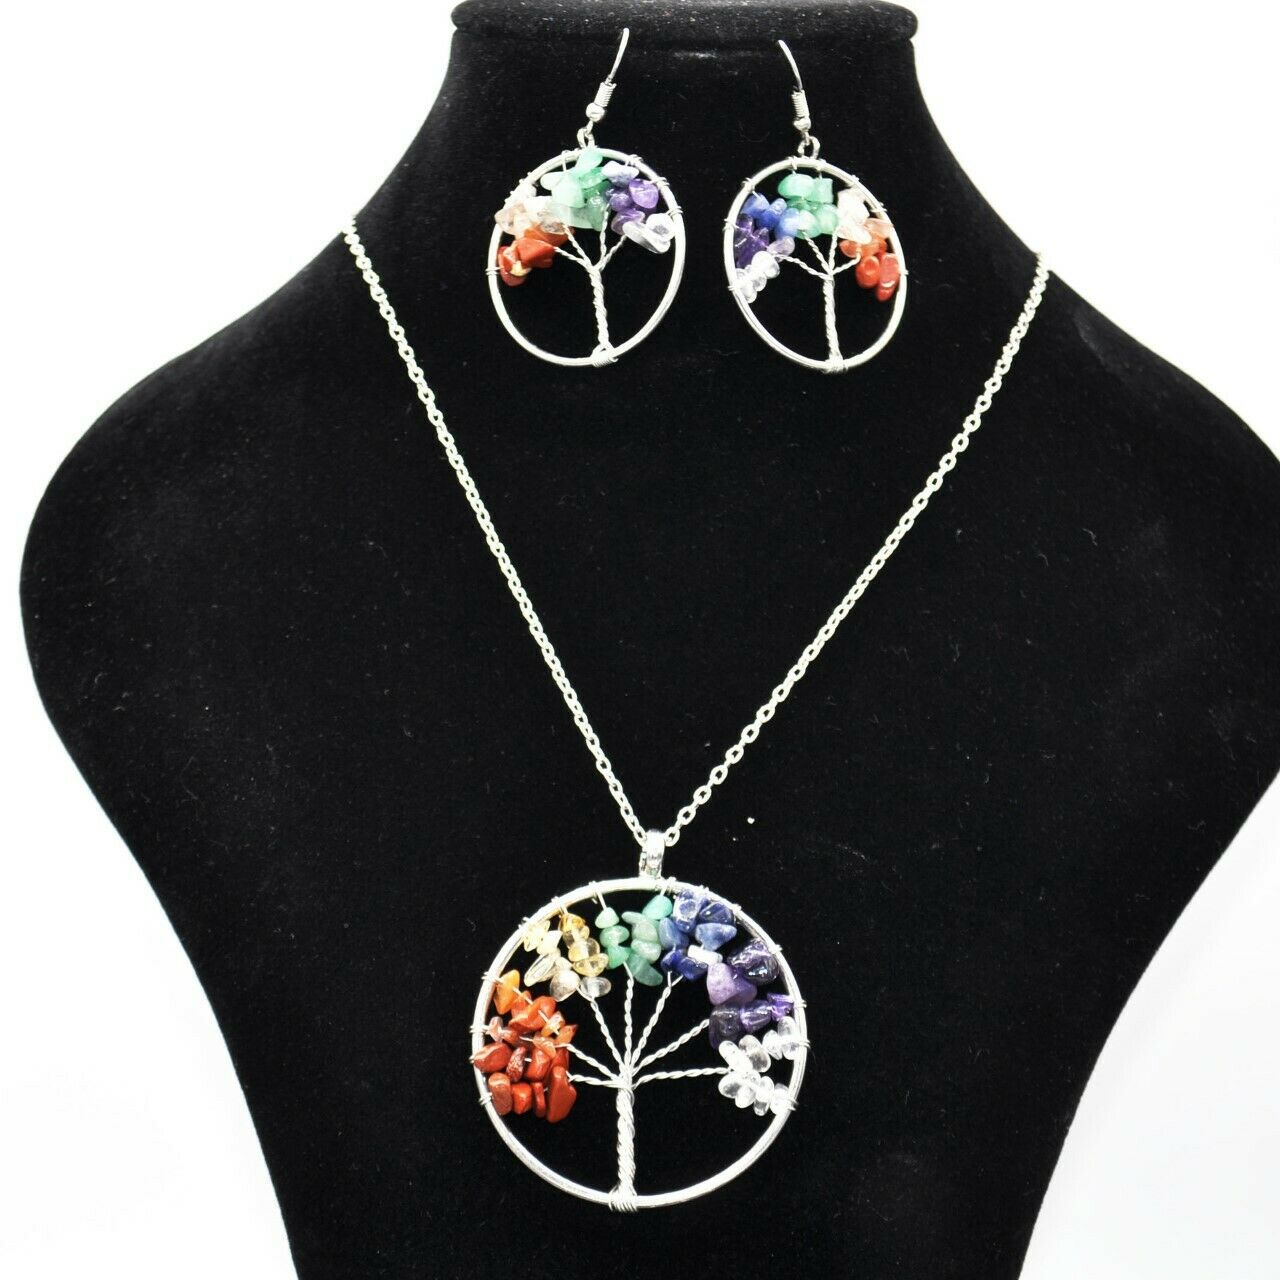 Silver Tone Tree of Life Natural Stone Beads Necklace and Earrings Gift Set UK